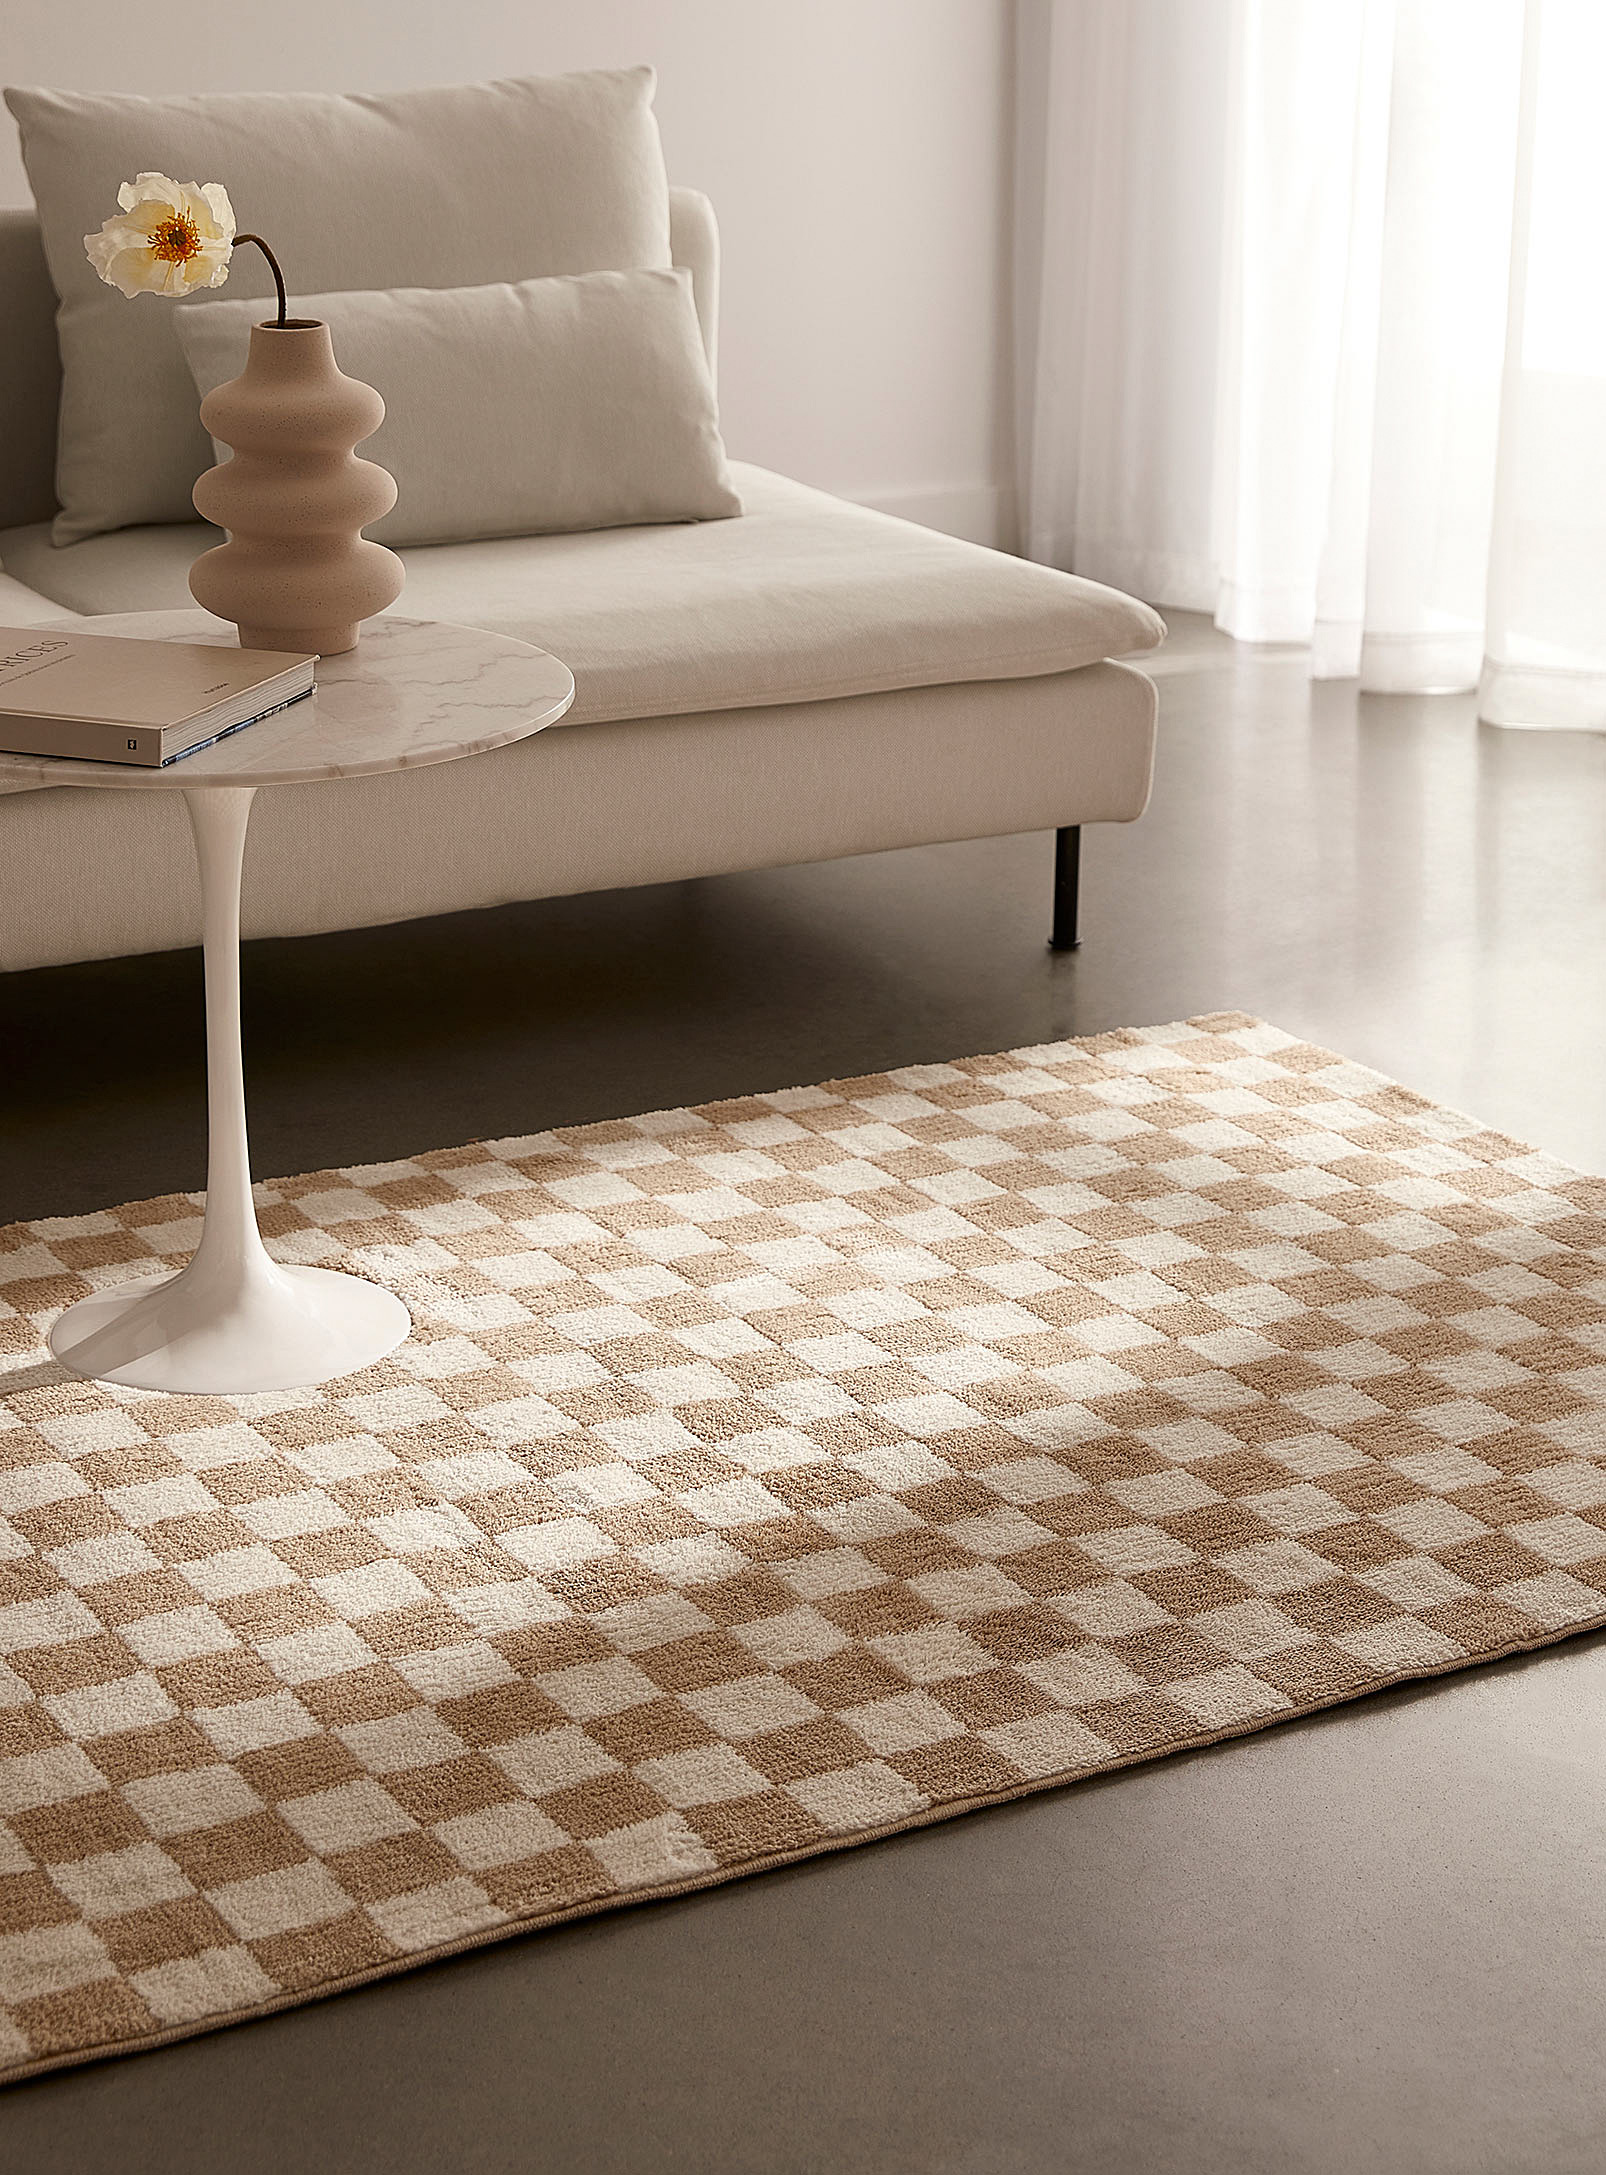 Simons Maison Soothing Checkerboard Tufted Rug 120 X 180 Cm In Patterned Brown